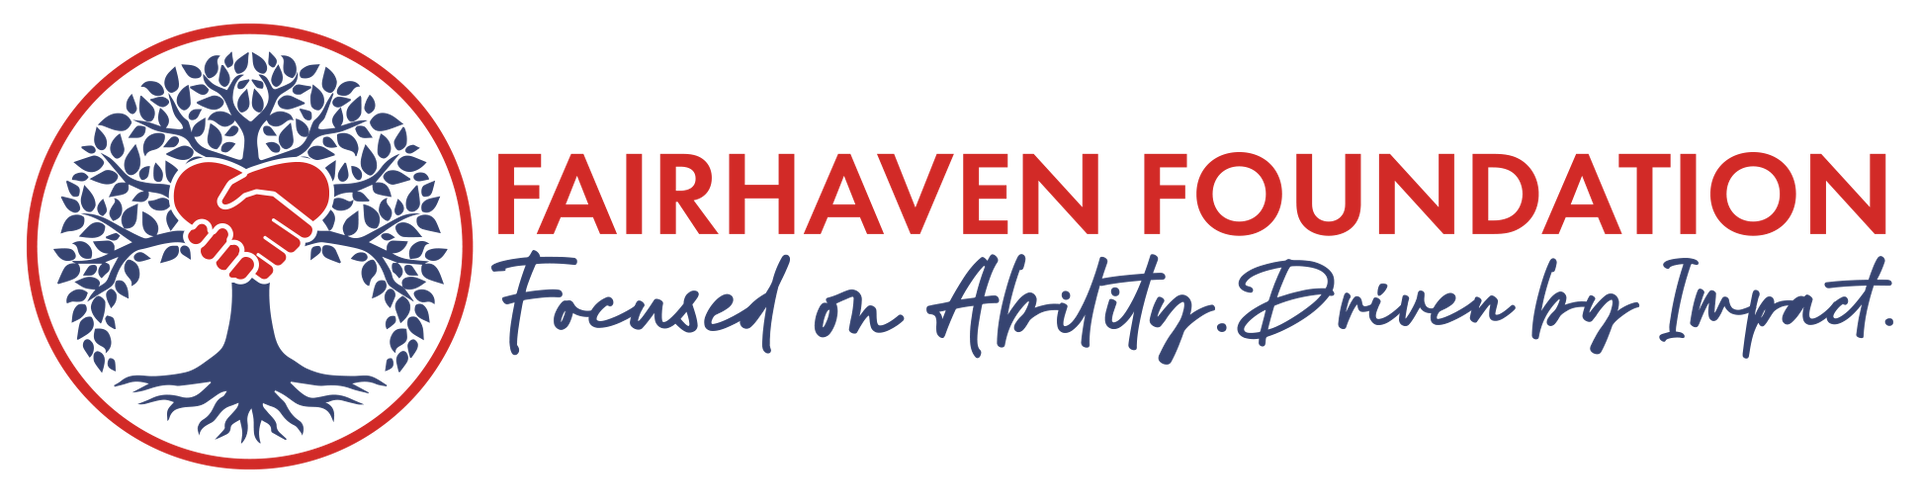 a logo for the Fairhaven Foundation